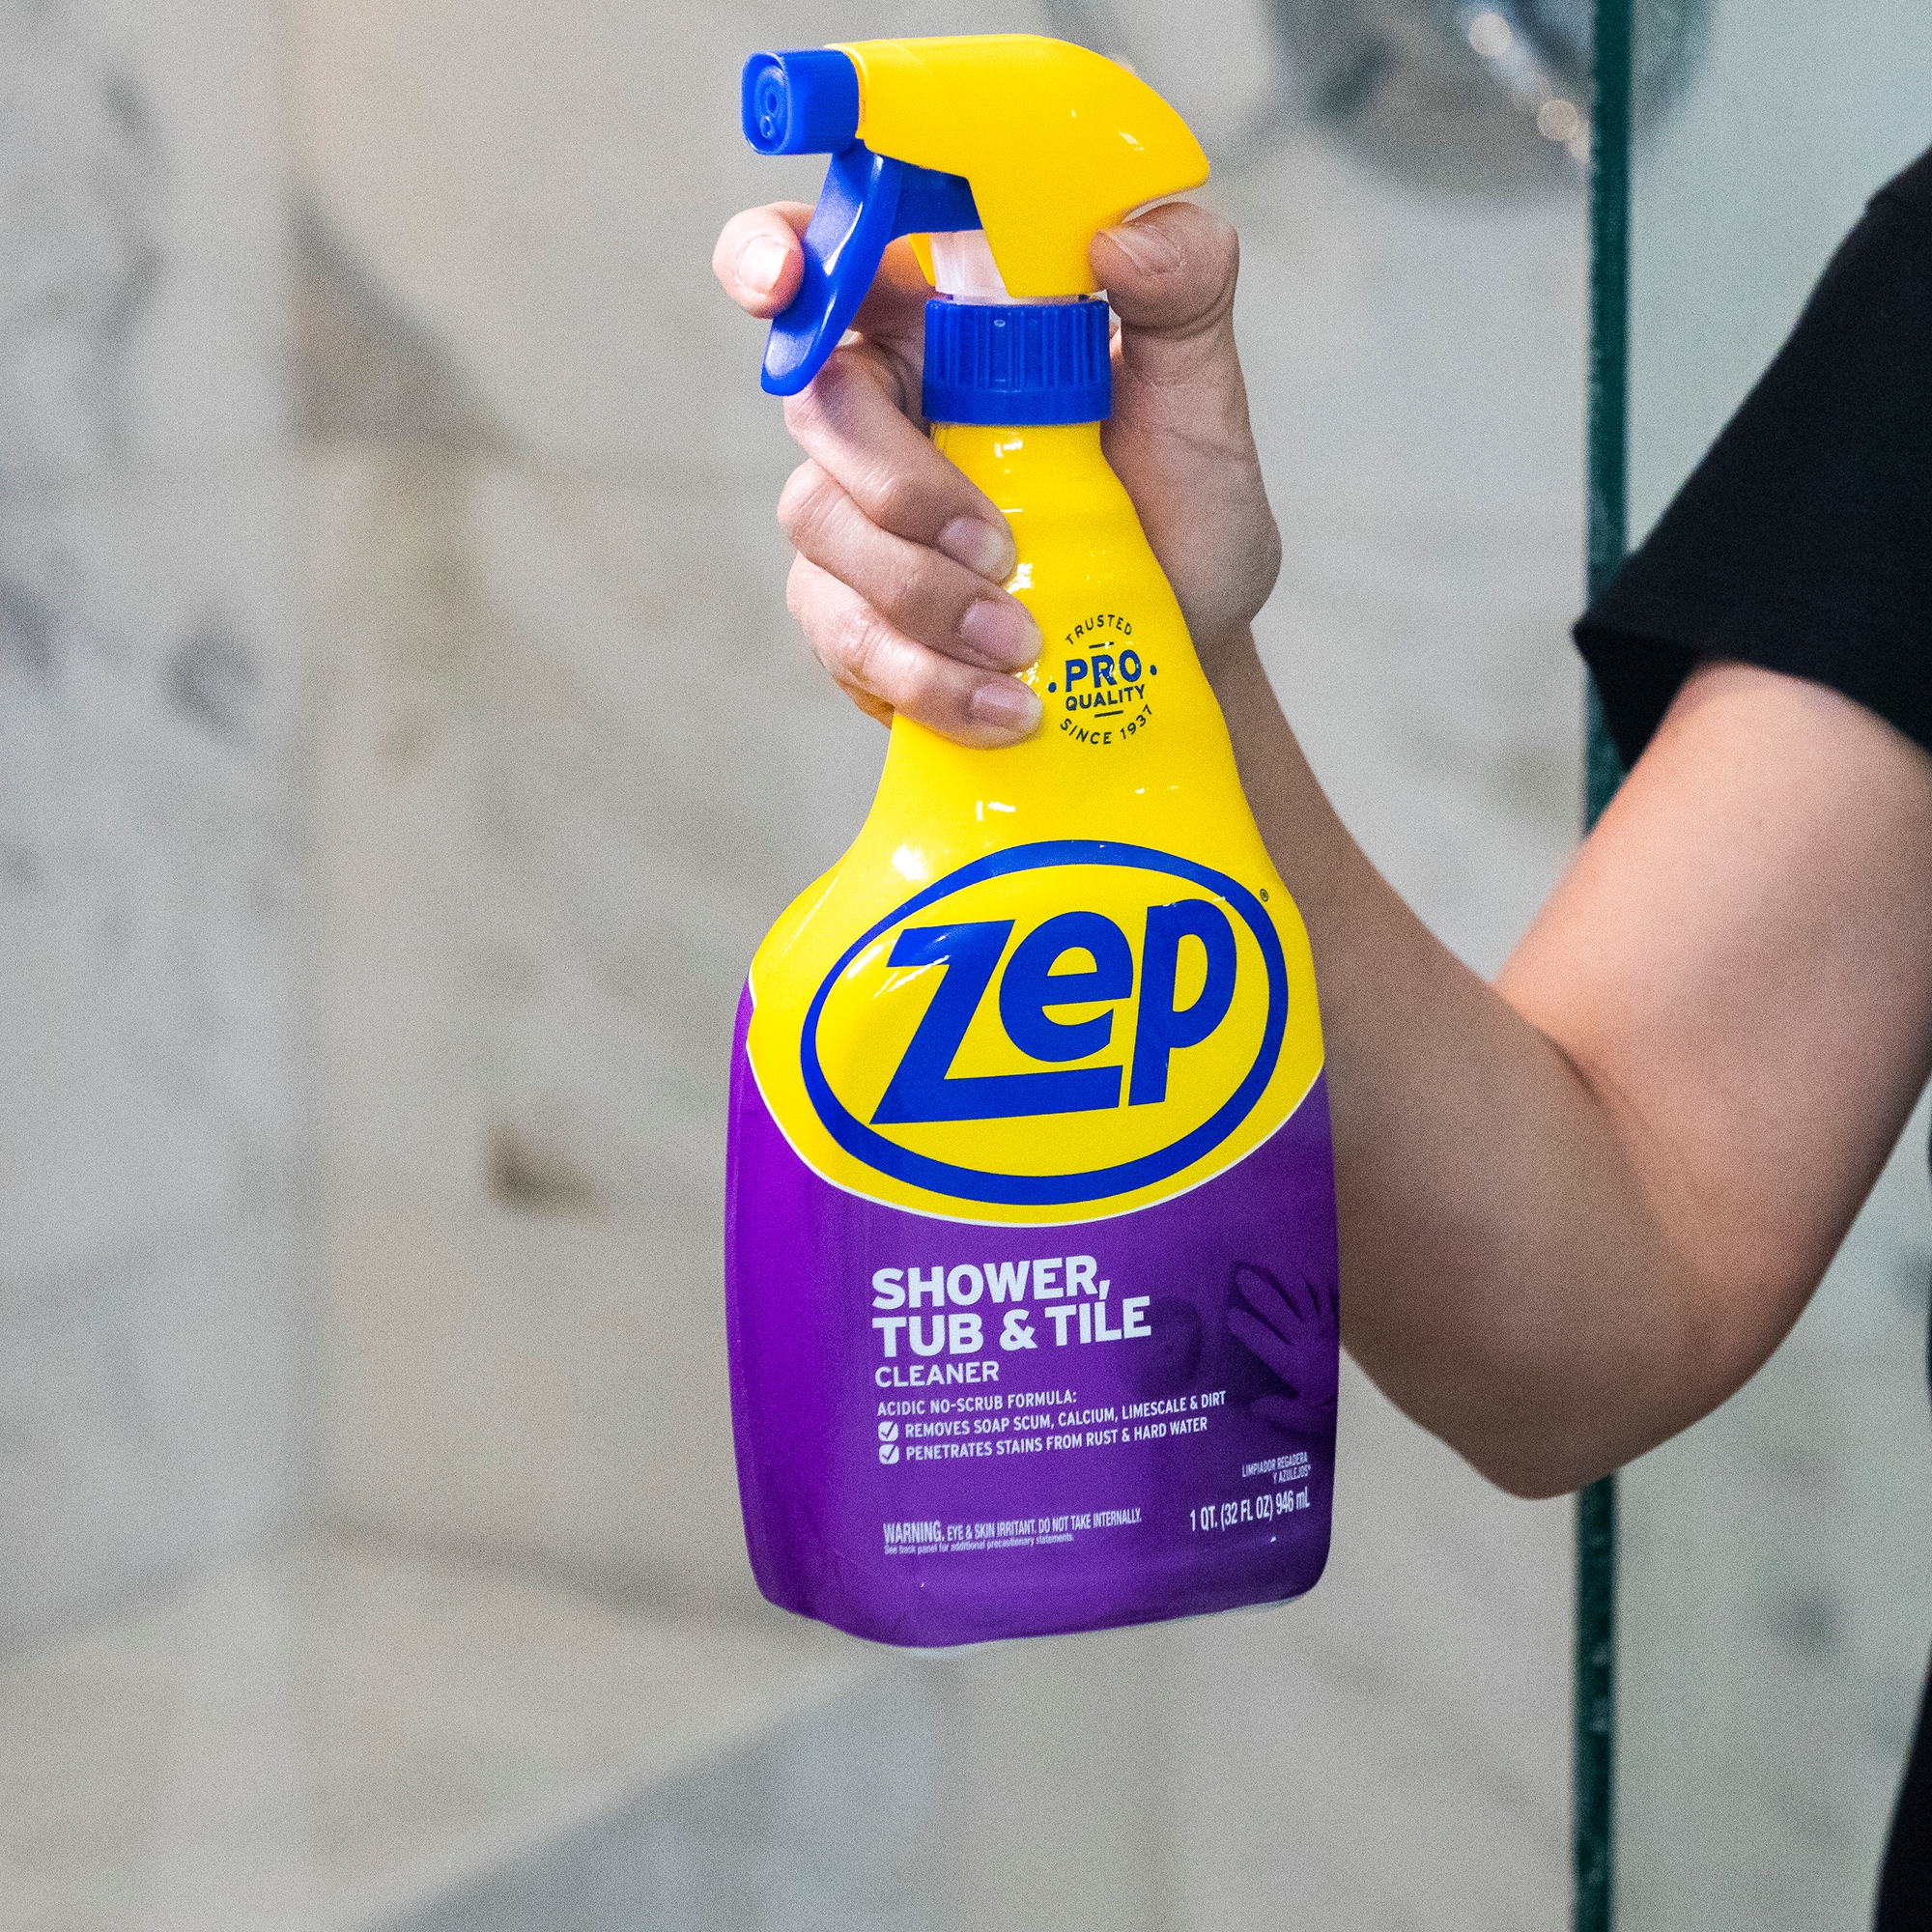 ZEP grout cleaner (Lowe's product)